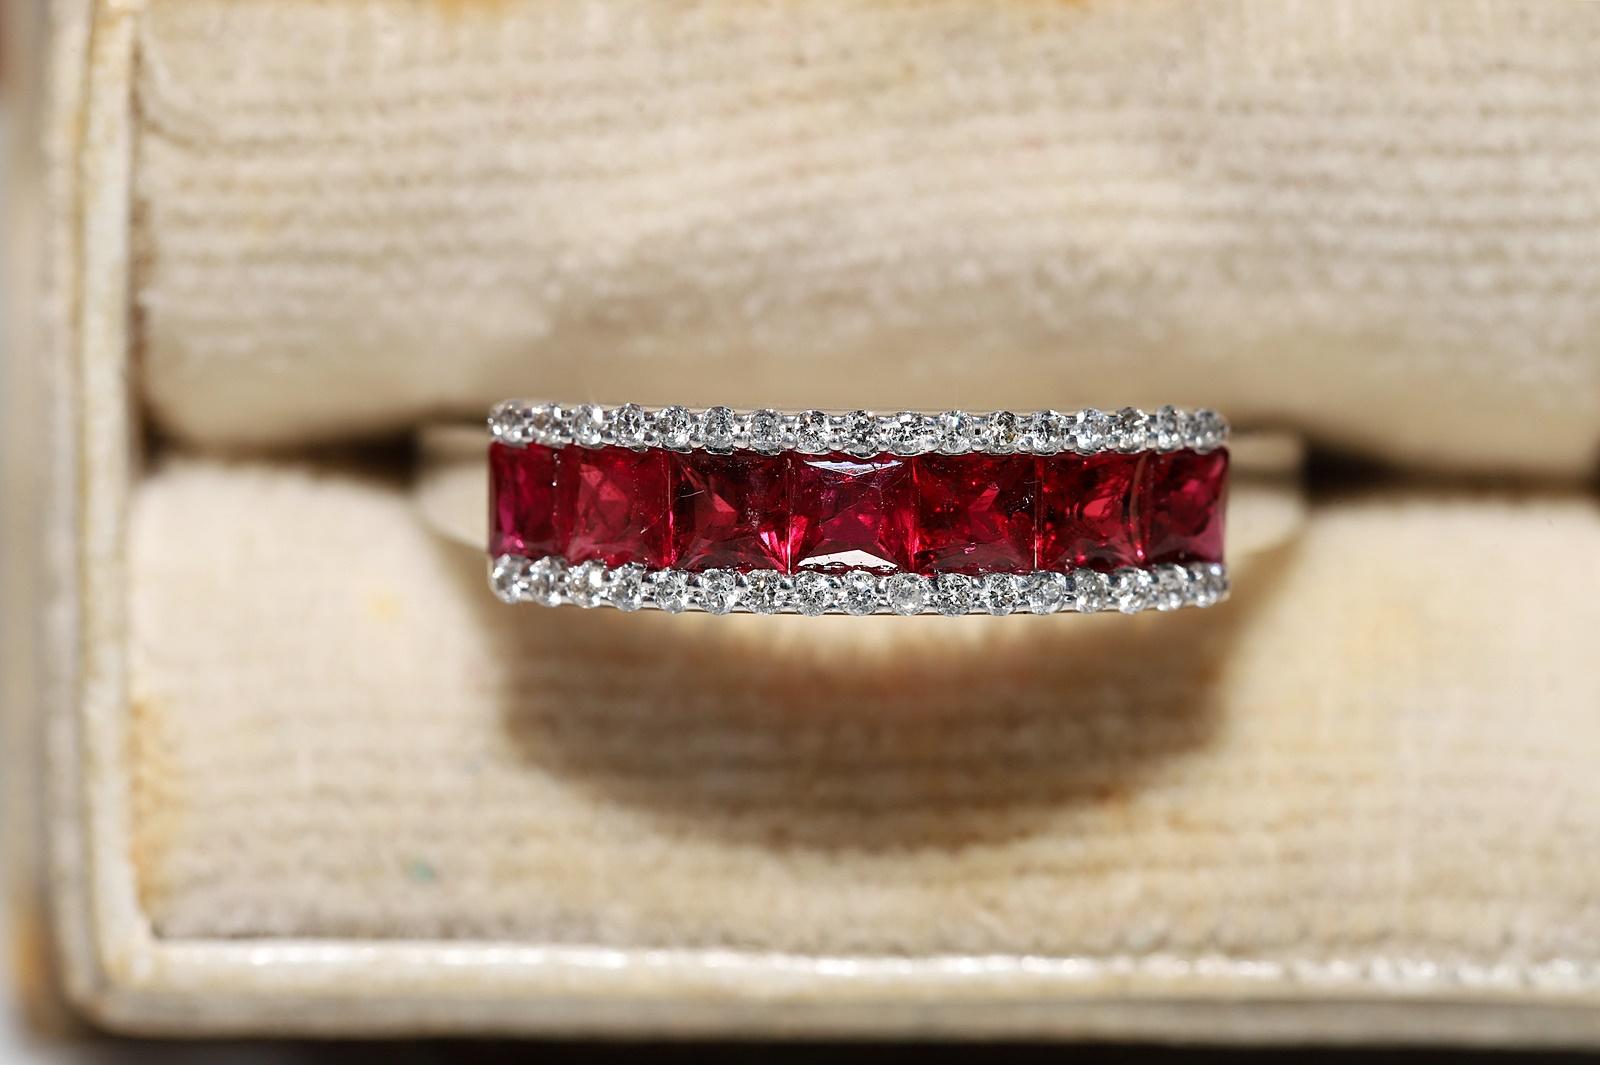 In very good condition.
Total weight is 2.1 grams.
Totally is diamond 0.10 ct.
The diamond is has F-G color and vvs-vs clarity.
Totally is ruby 0.78 ct.
Ring size is US 6.5 (We offer free resizing)
We can make any size.
Box is not included.
Please